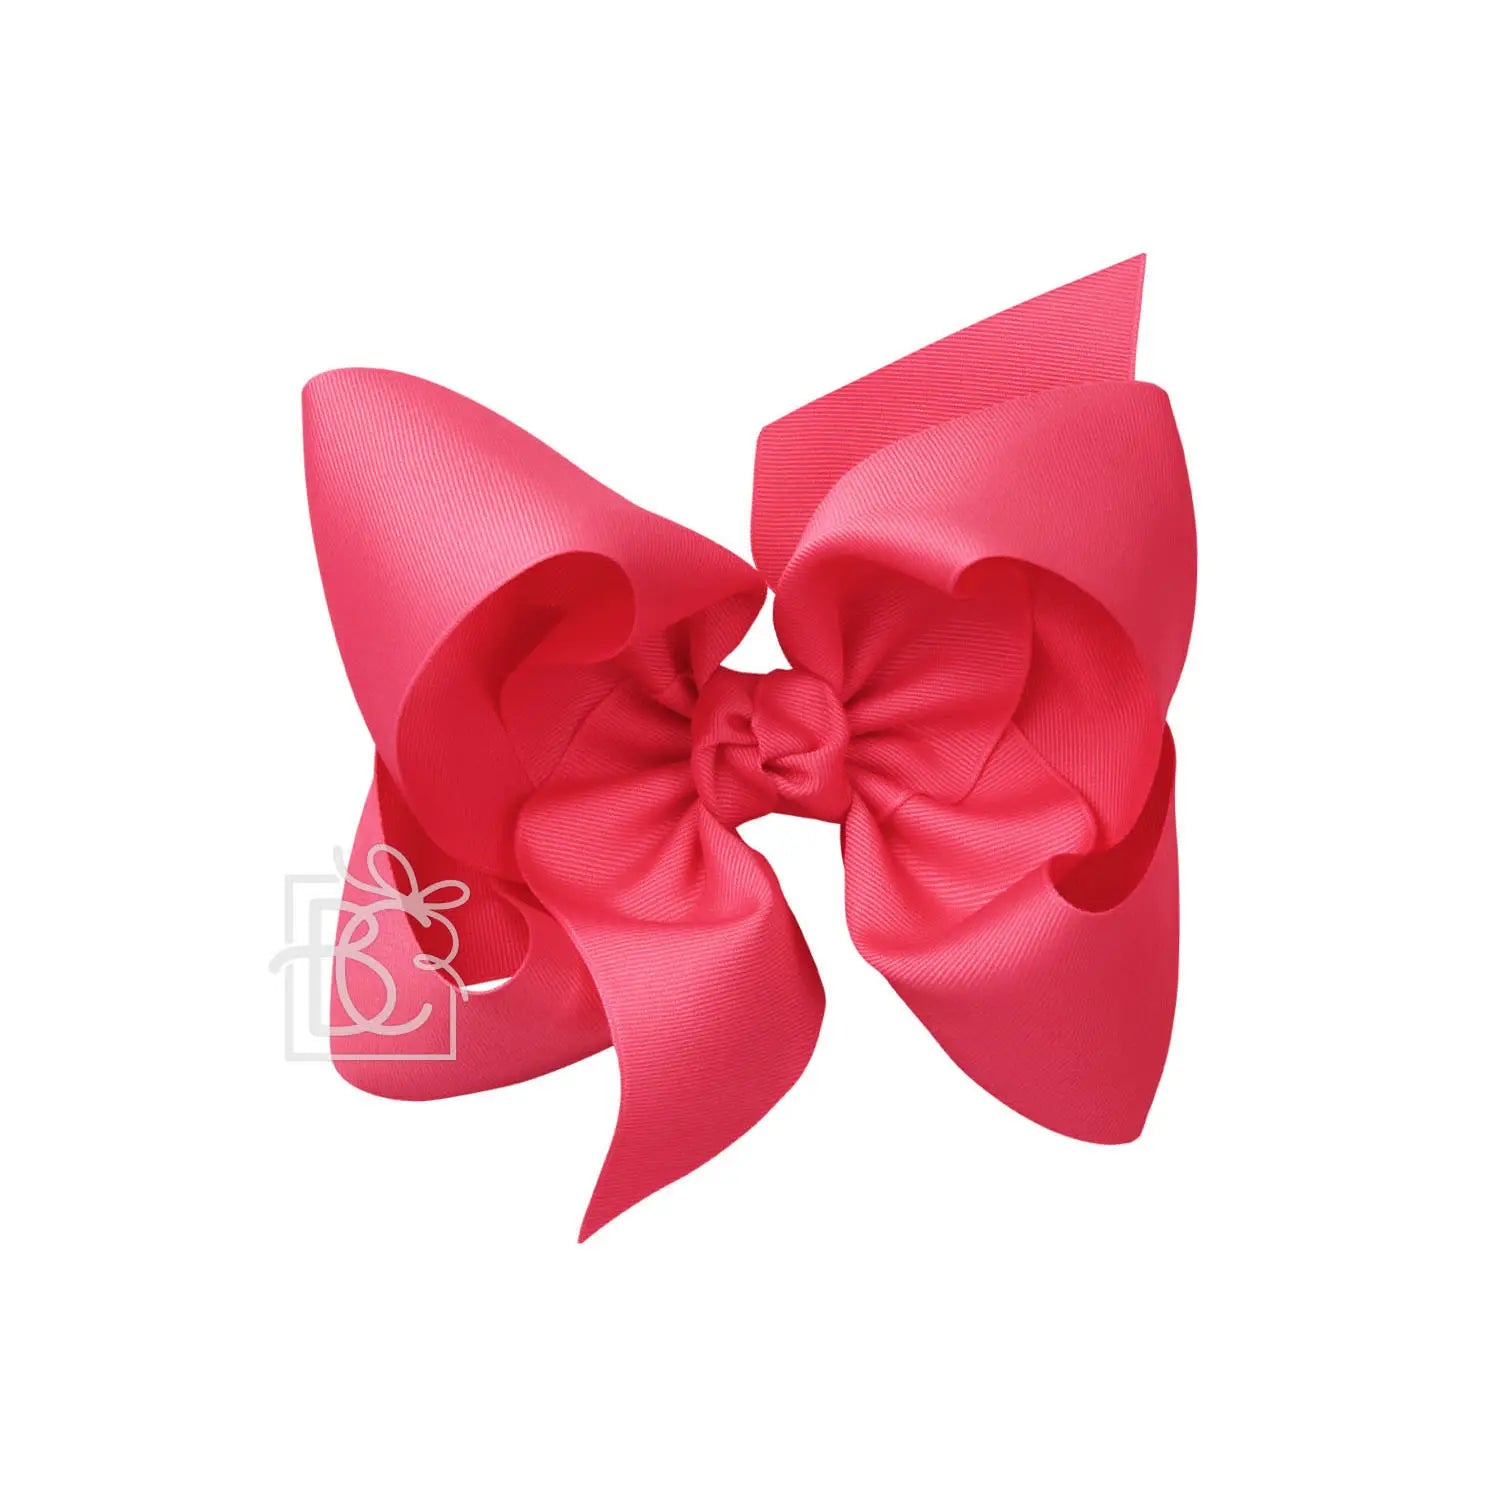 Texas Sized Bow in French Pink  - Doodlebug's Children's Boutique